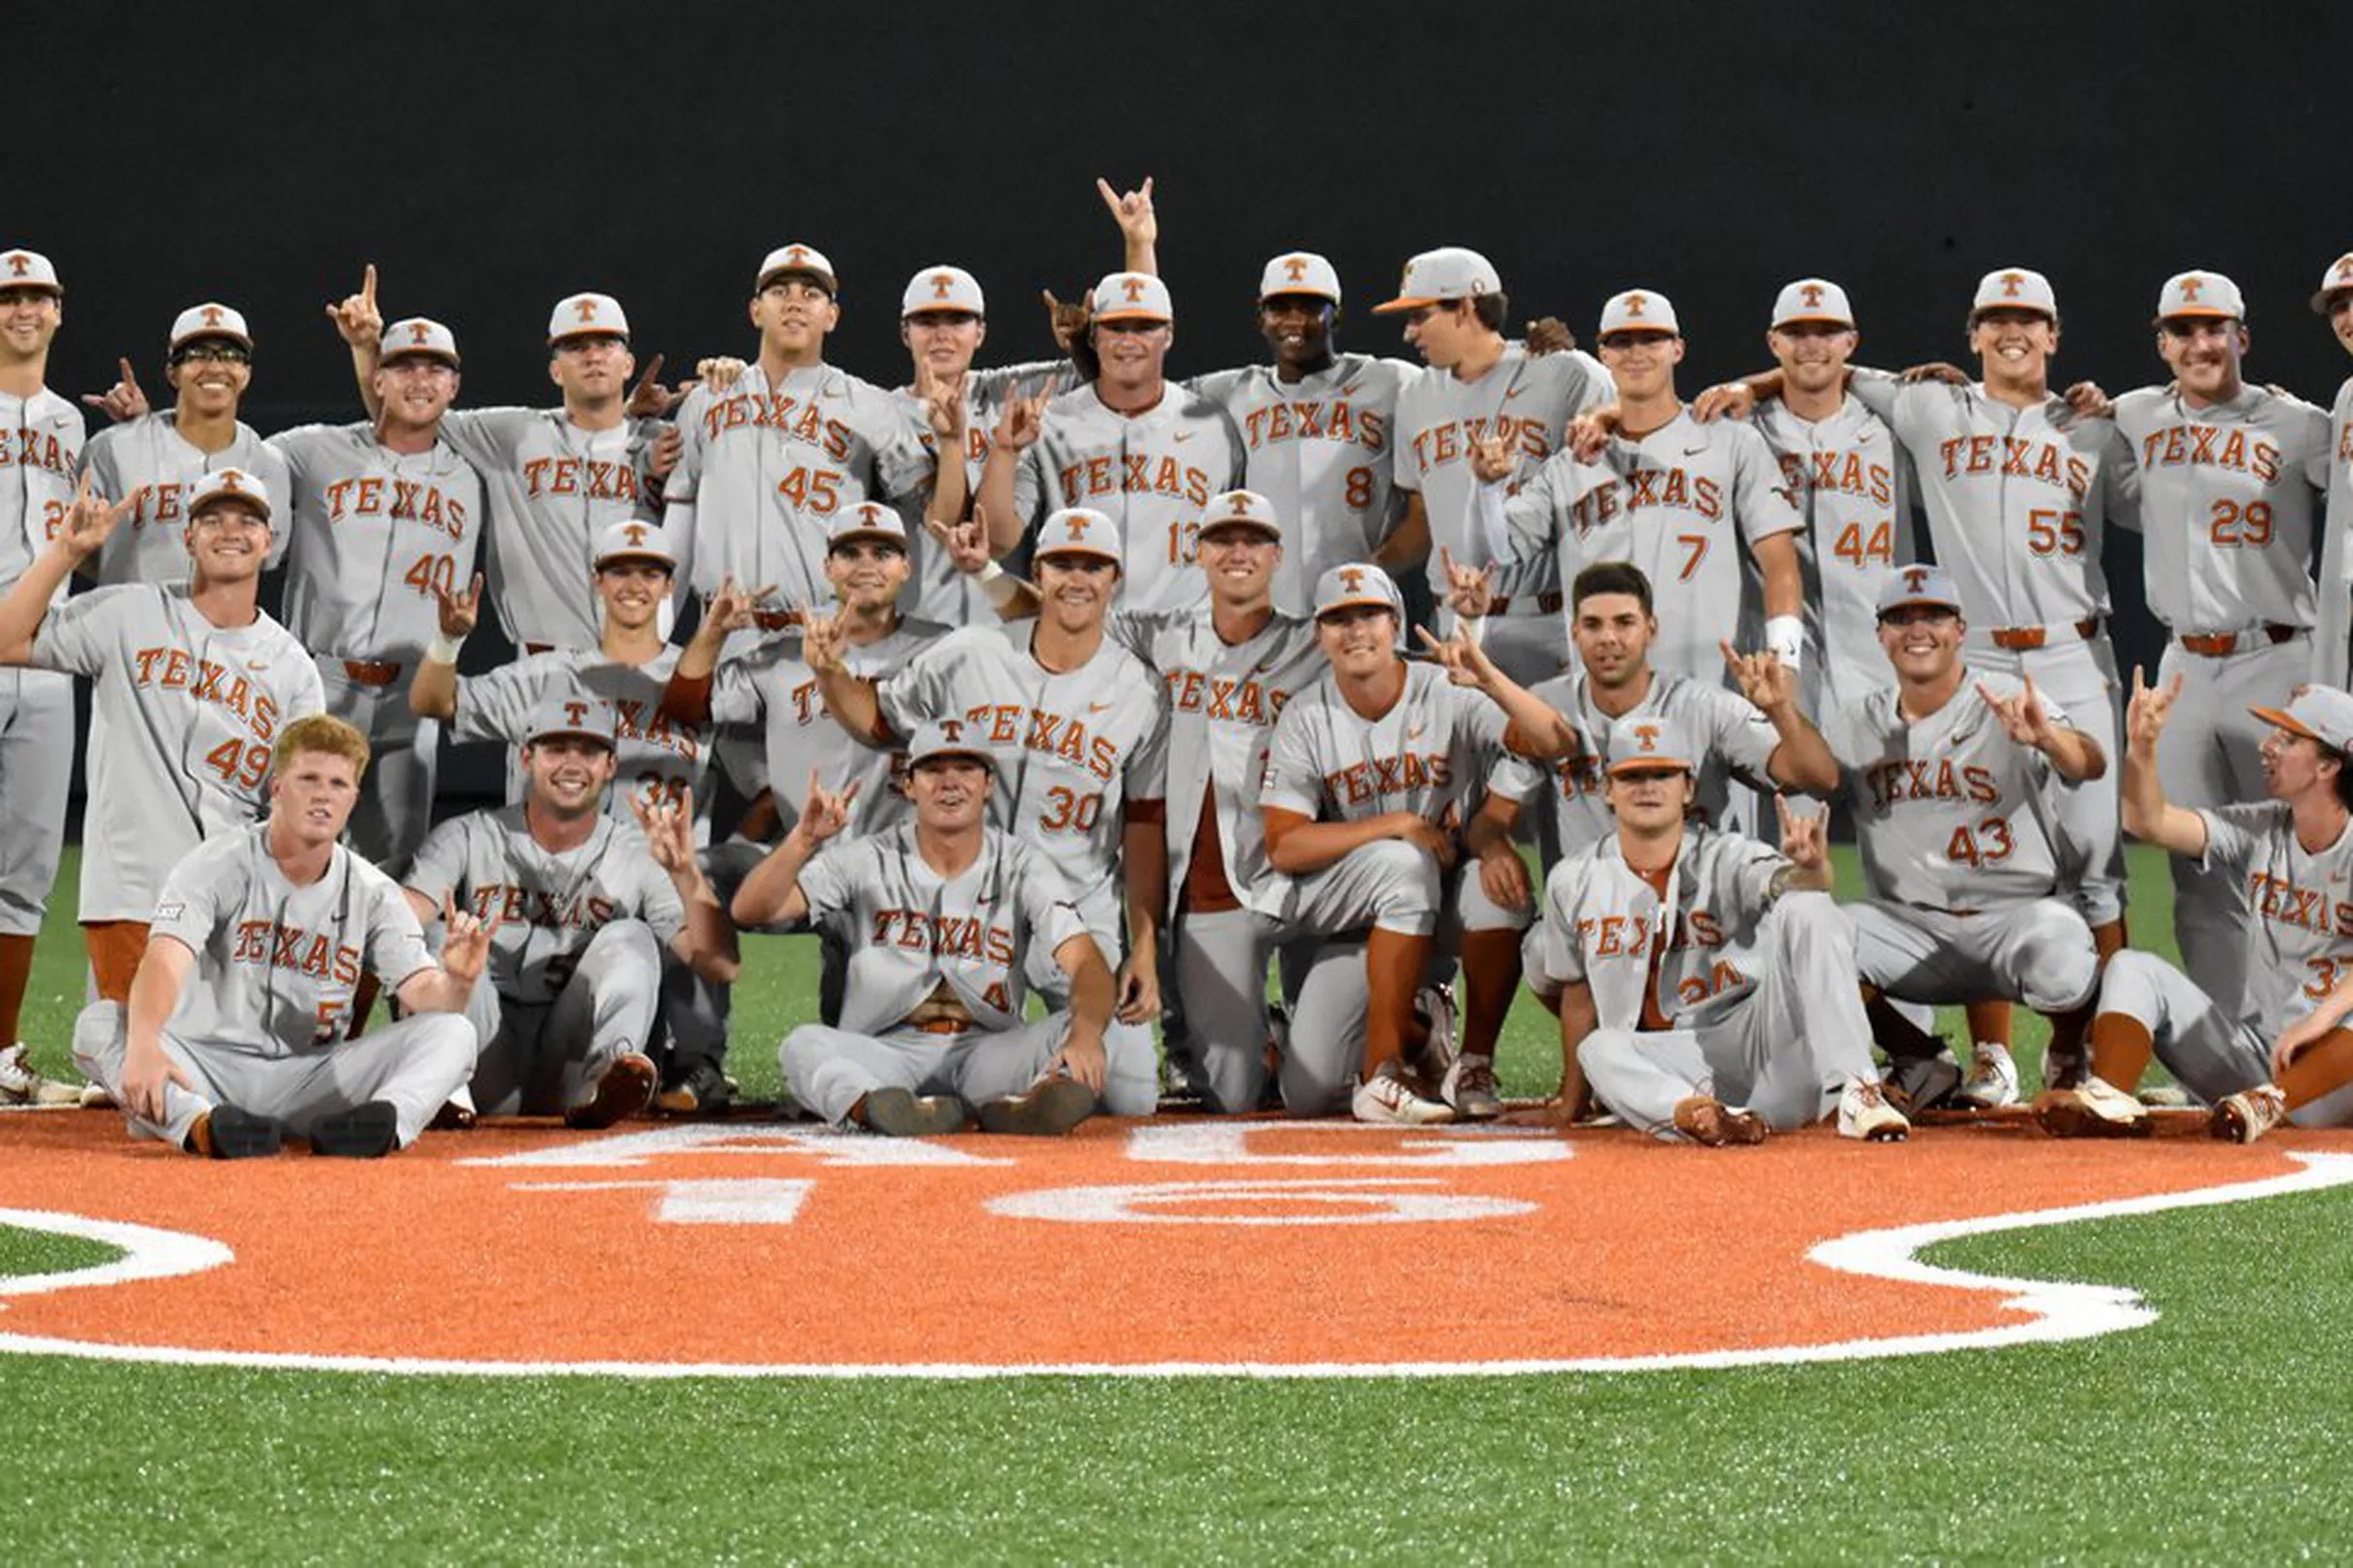 Texas baseball will face Tennessee Tech in the Austin Super Regional